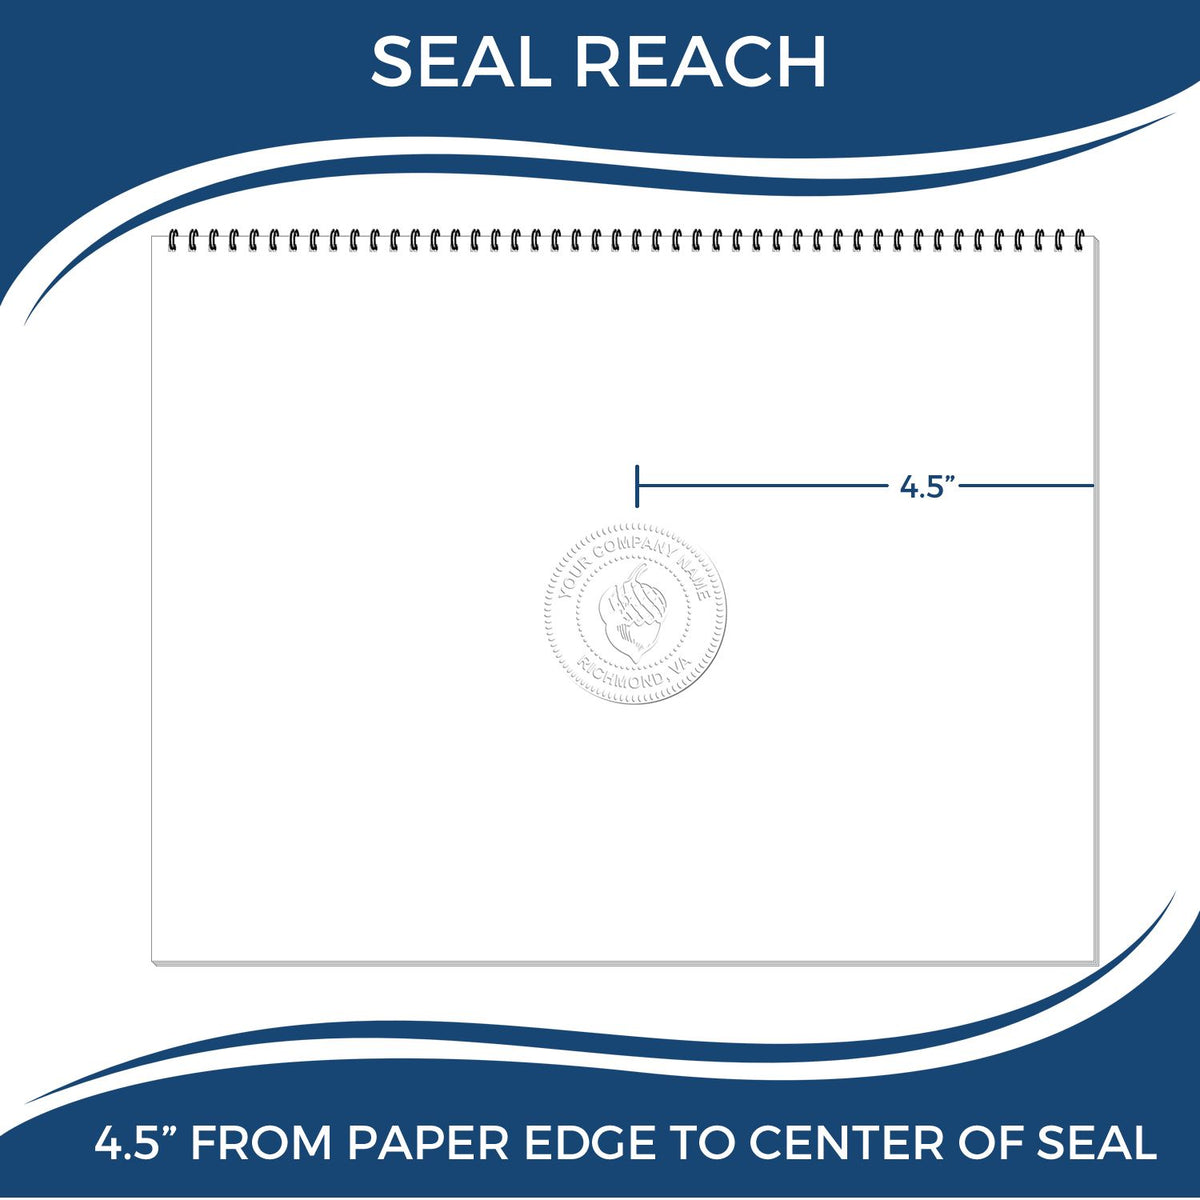 An infographic showing the seal reach which is represented by a ruler and a miniature seal image of the State of Oklahoma Extended Long Reach Geologist Seal